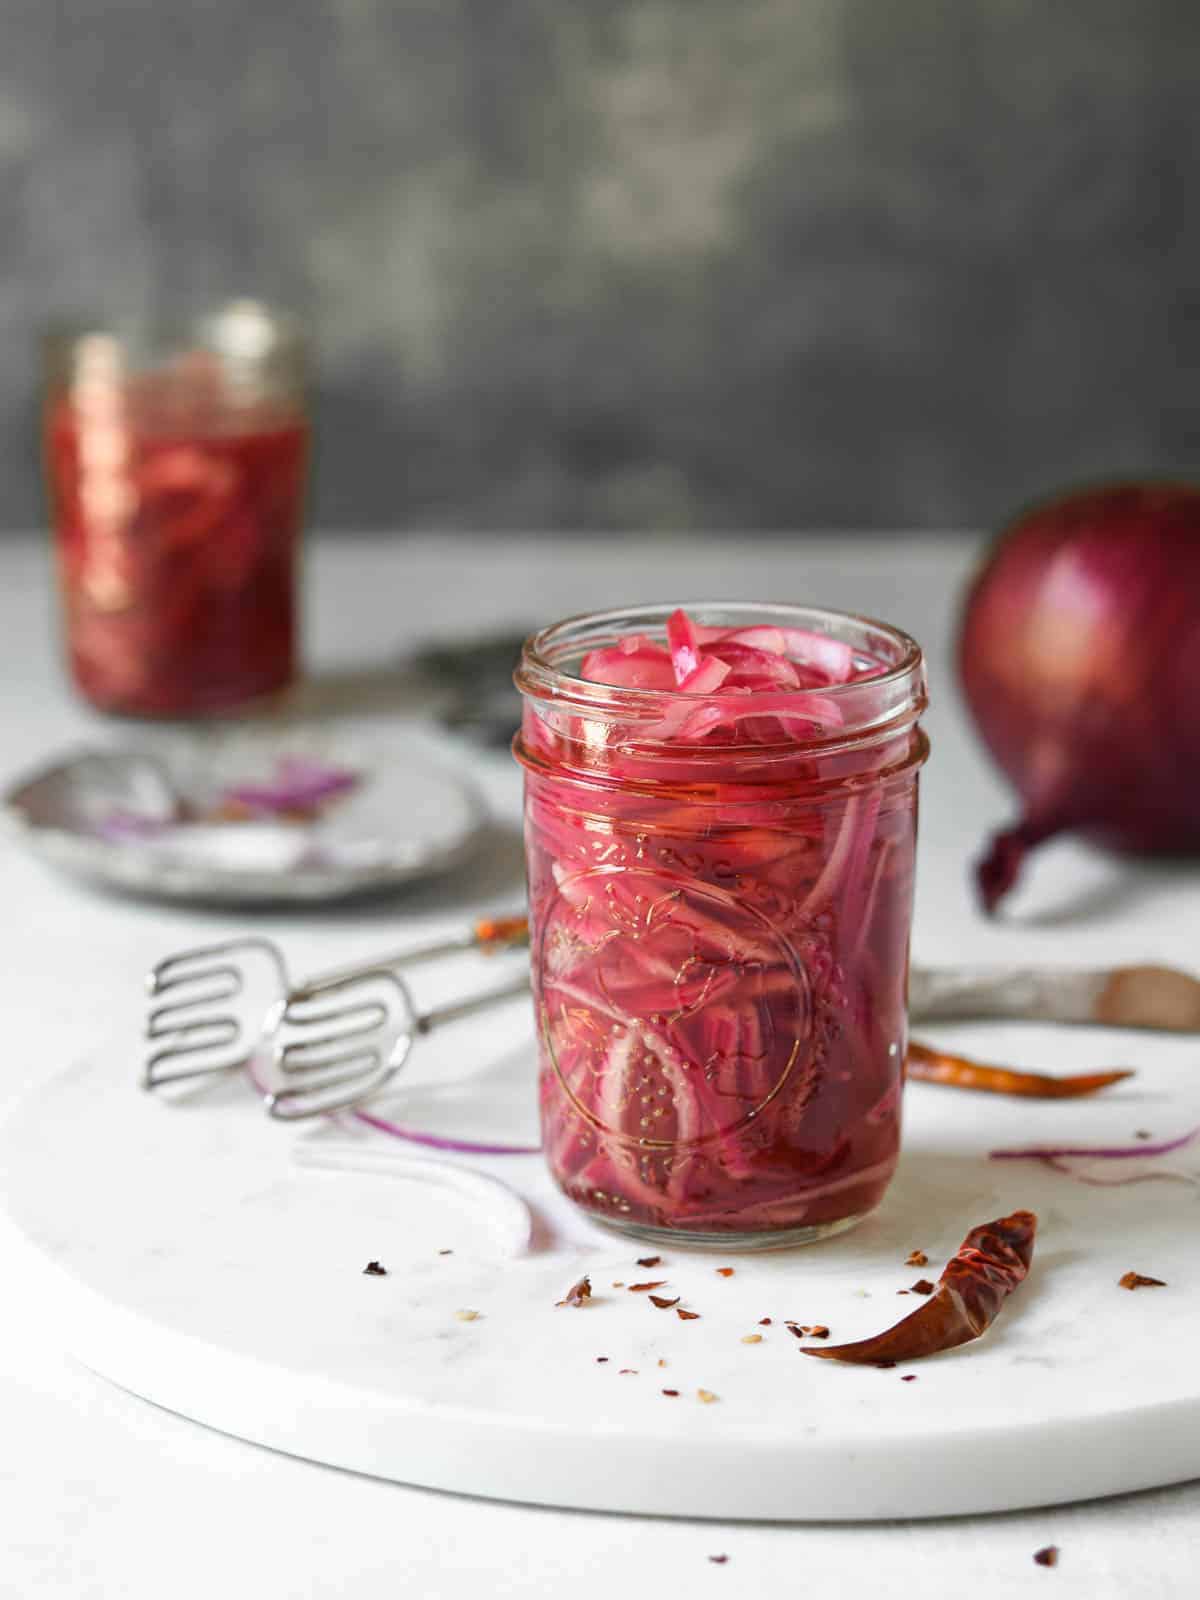 Red-onions in a jar with spices around it on a marble surface.